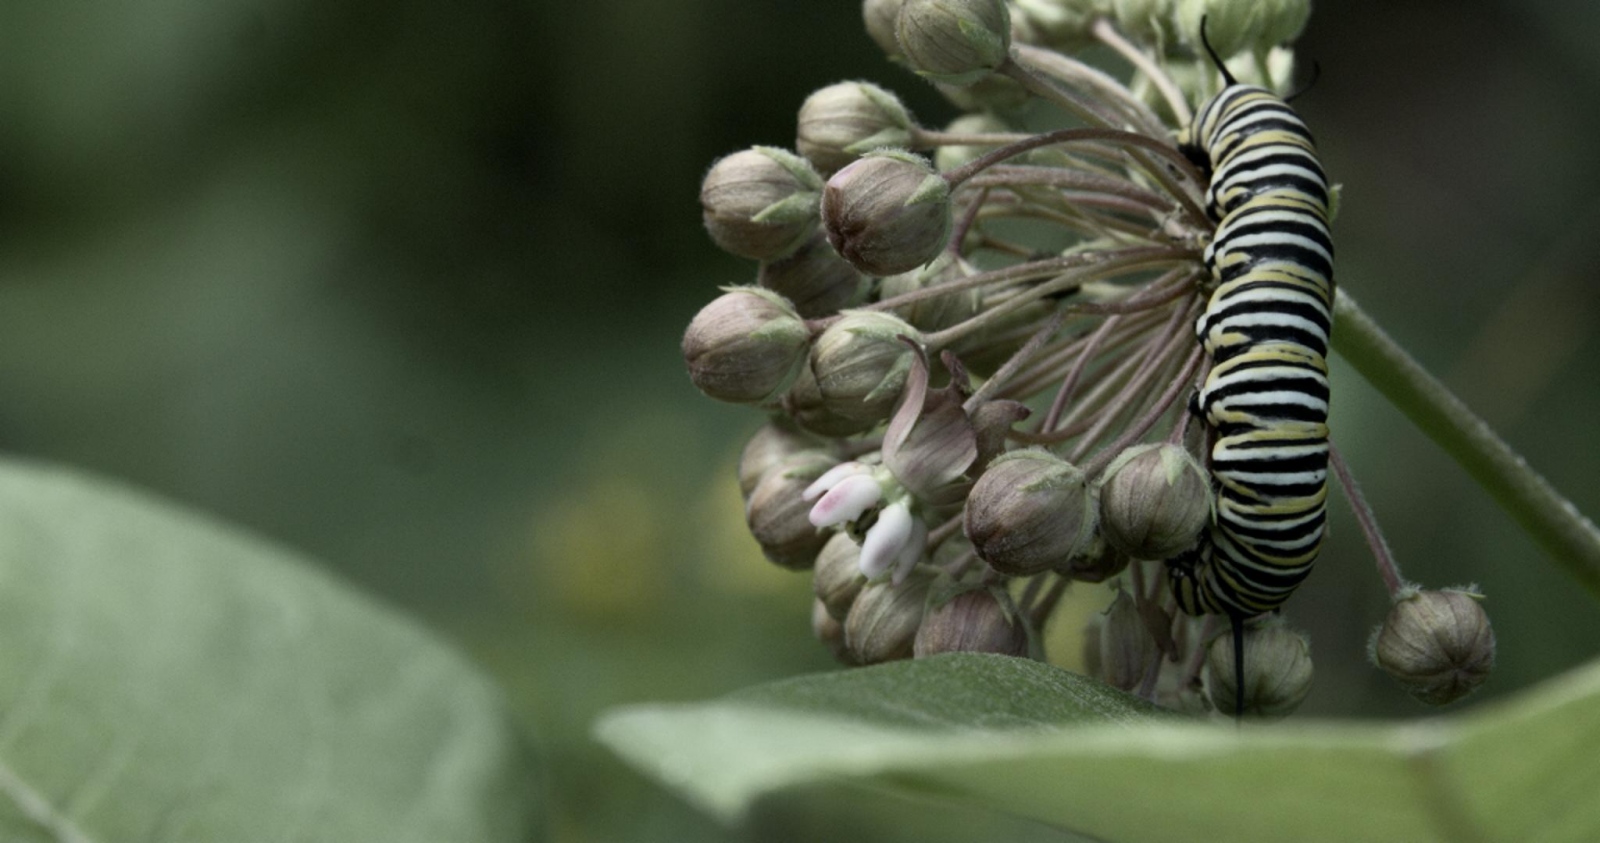 The Changing Climate - Caterpillar Feast  A caterpillar feasting on milkweed in...